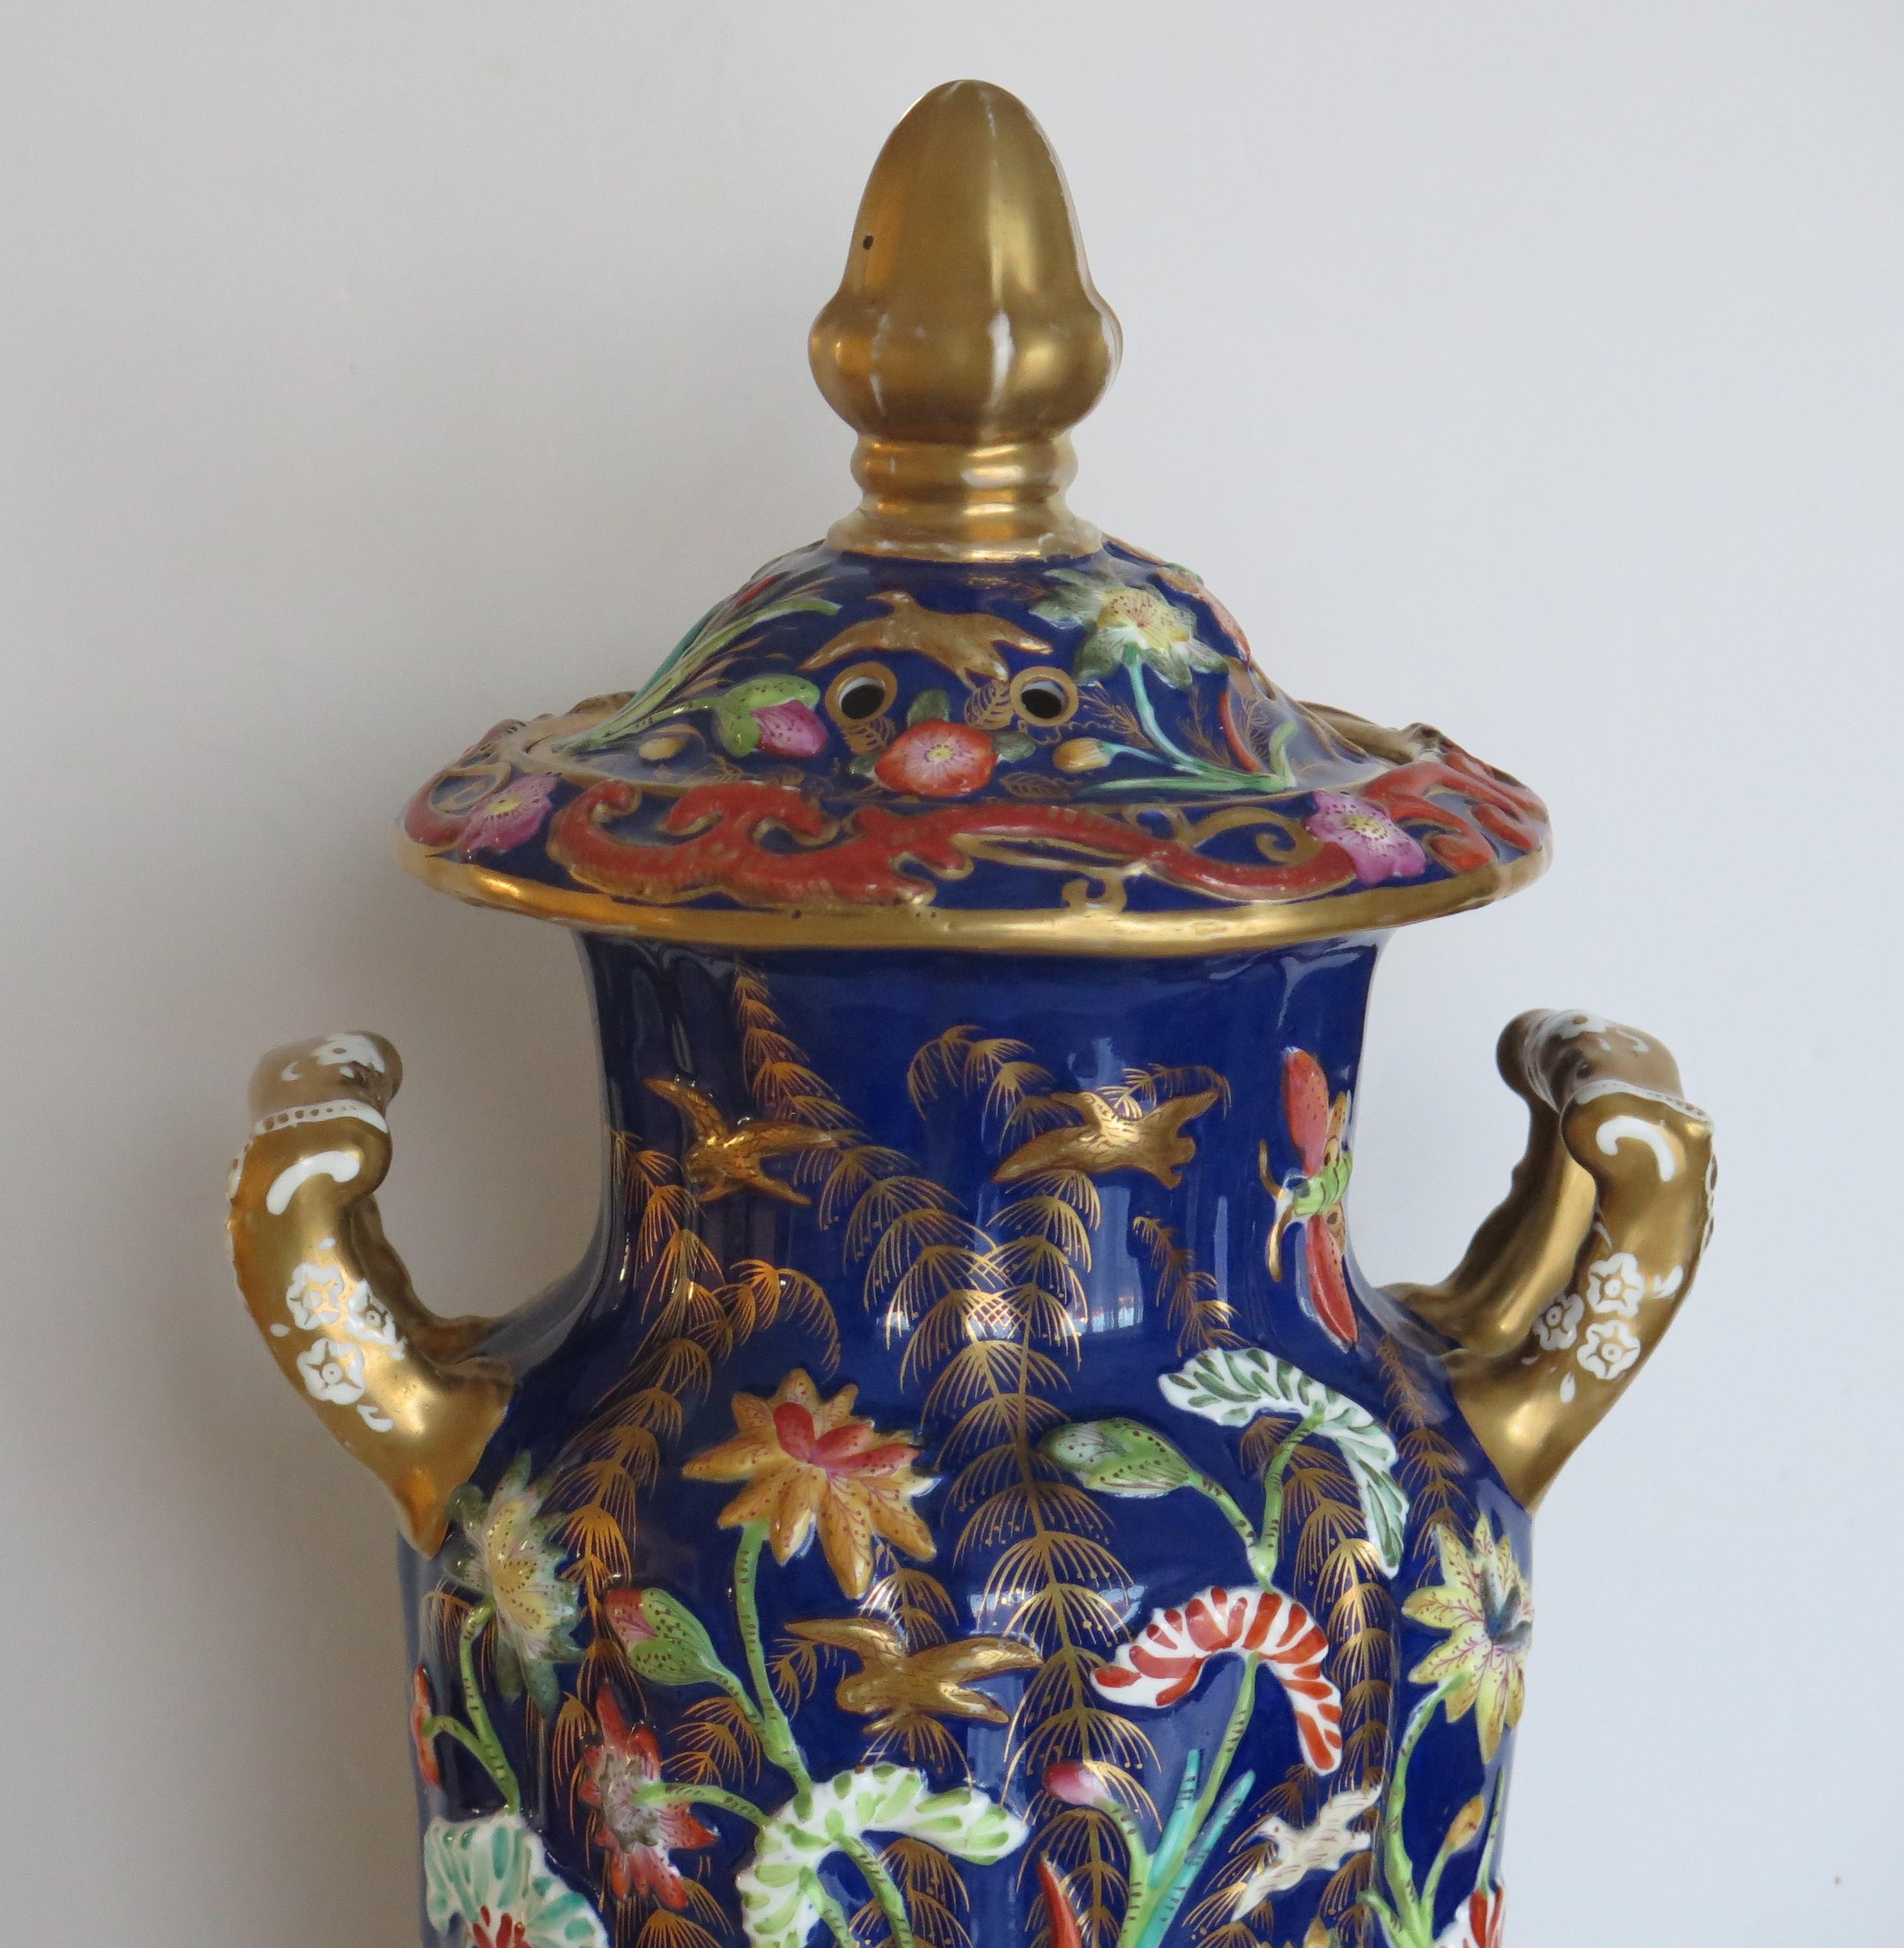 This is a very rare and large Covered Vase by Mason's Ironstone pottery, England, dating to the Late Georgian Regency period , circa 1825.

This piece is very well potted with a vertically fluted body sat on a low foot with two substantial handles